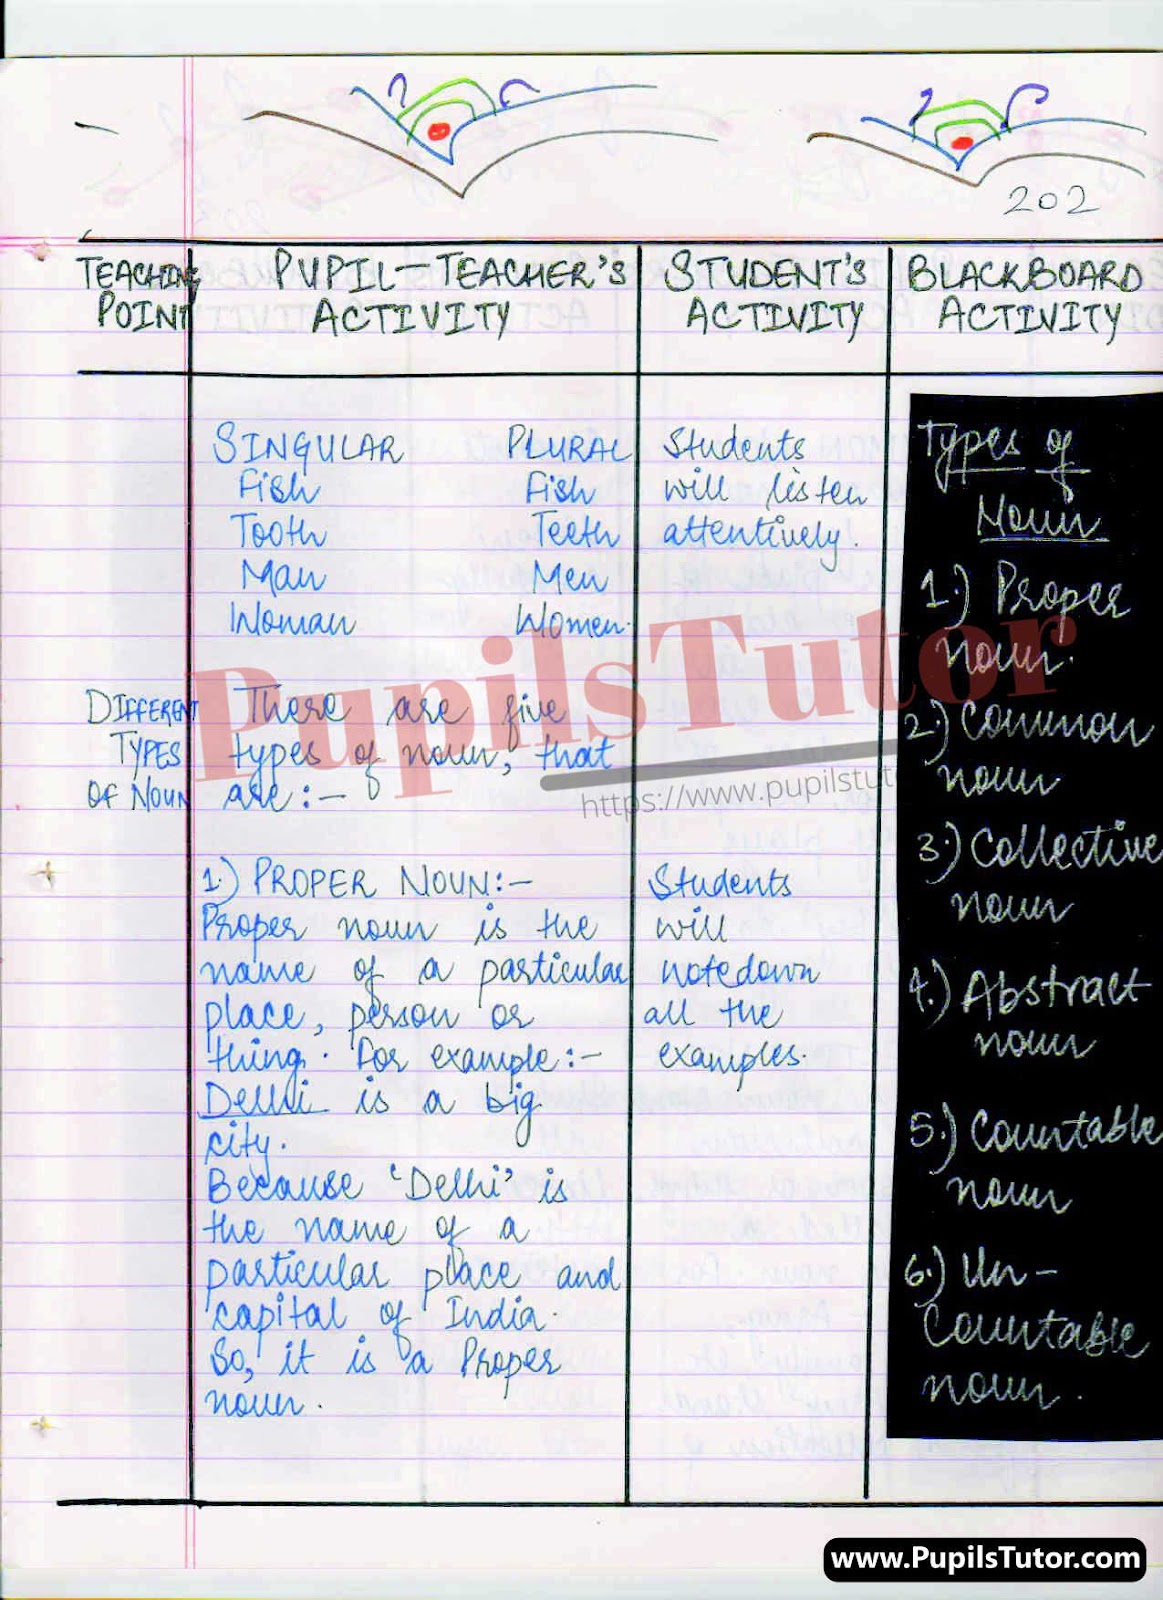 Lesson Plan On Types Of Noun For Class 6 To 10th.  – [Page And Pic Number 5] – https://www.pupilstutor.com/